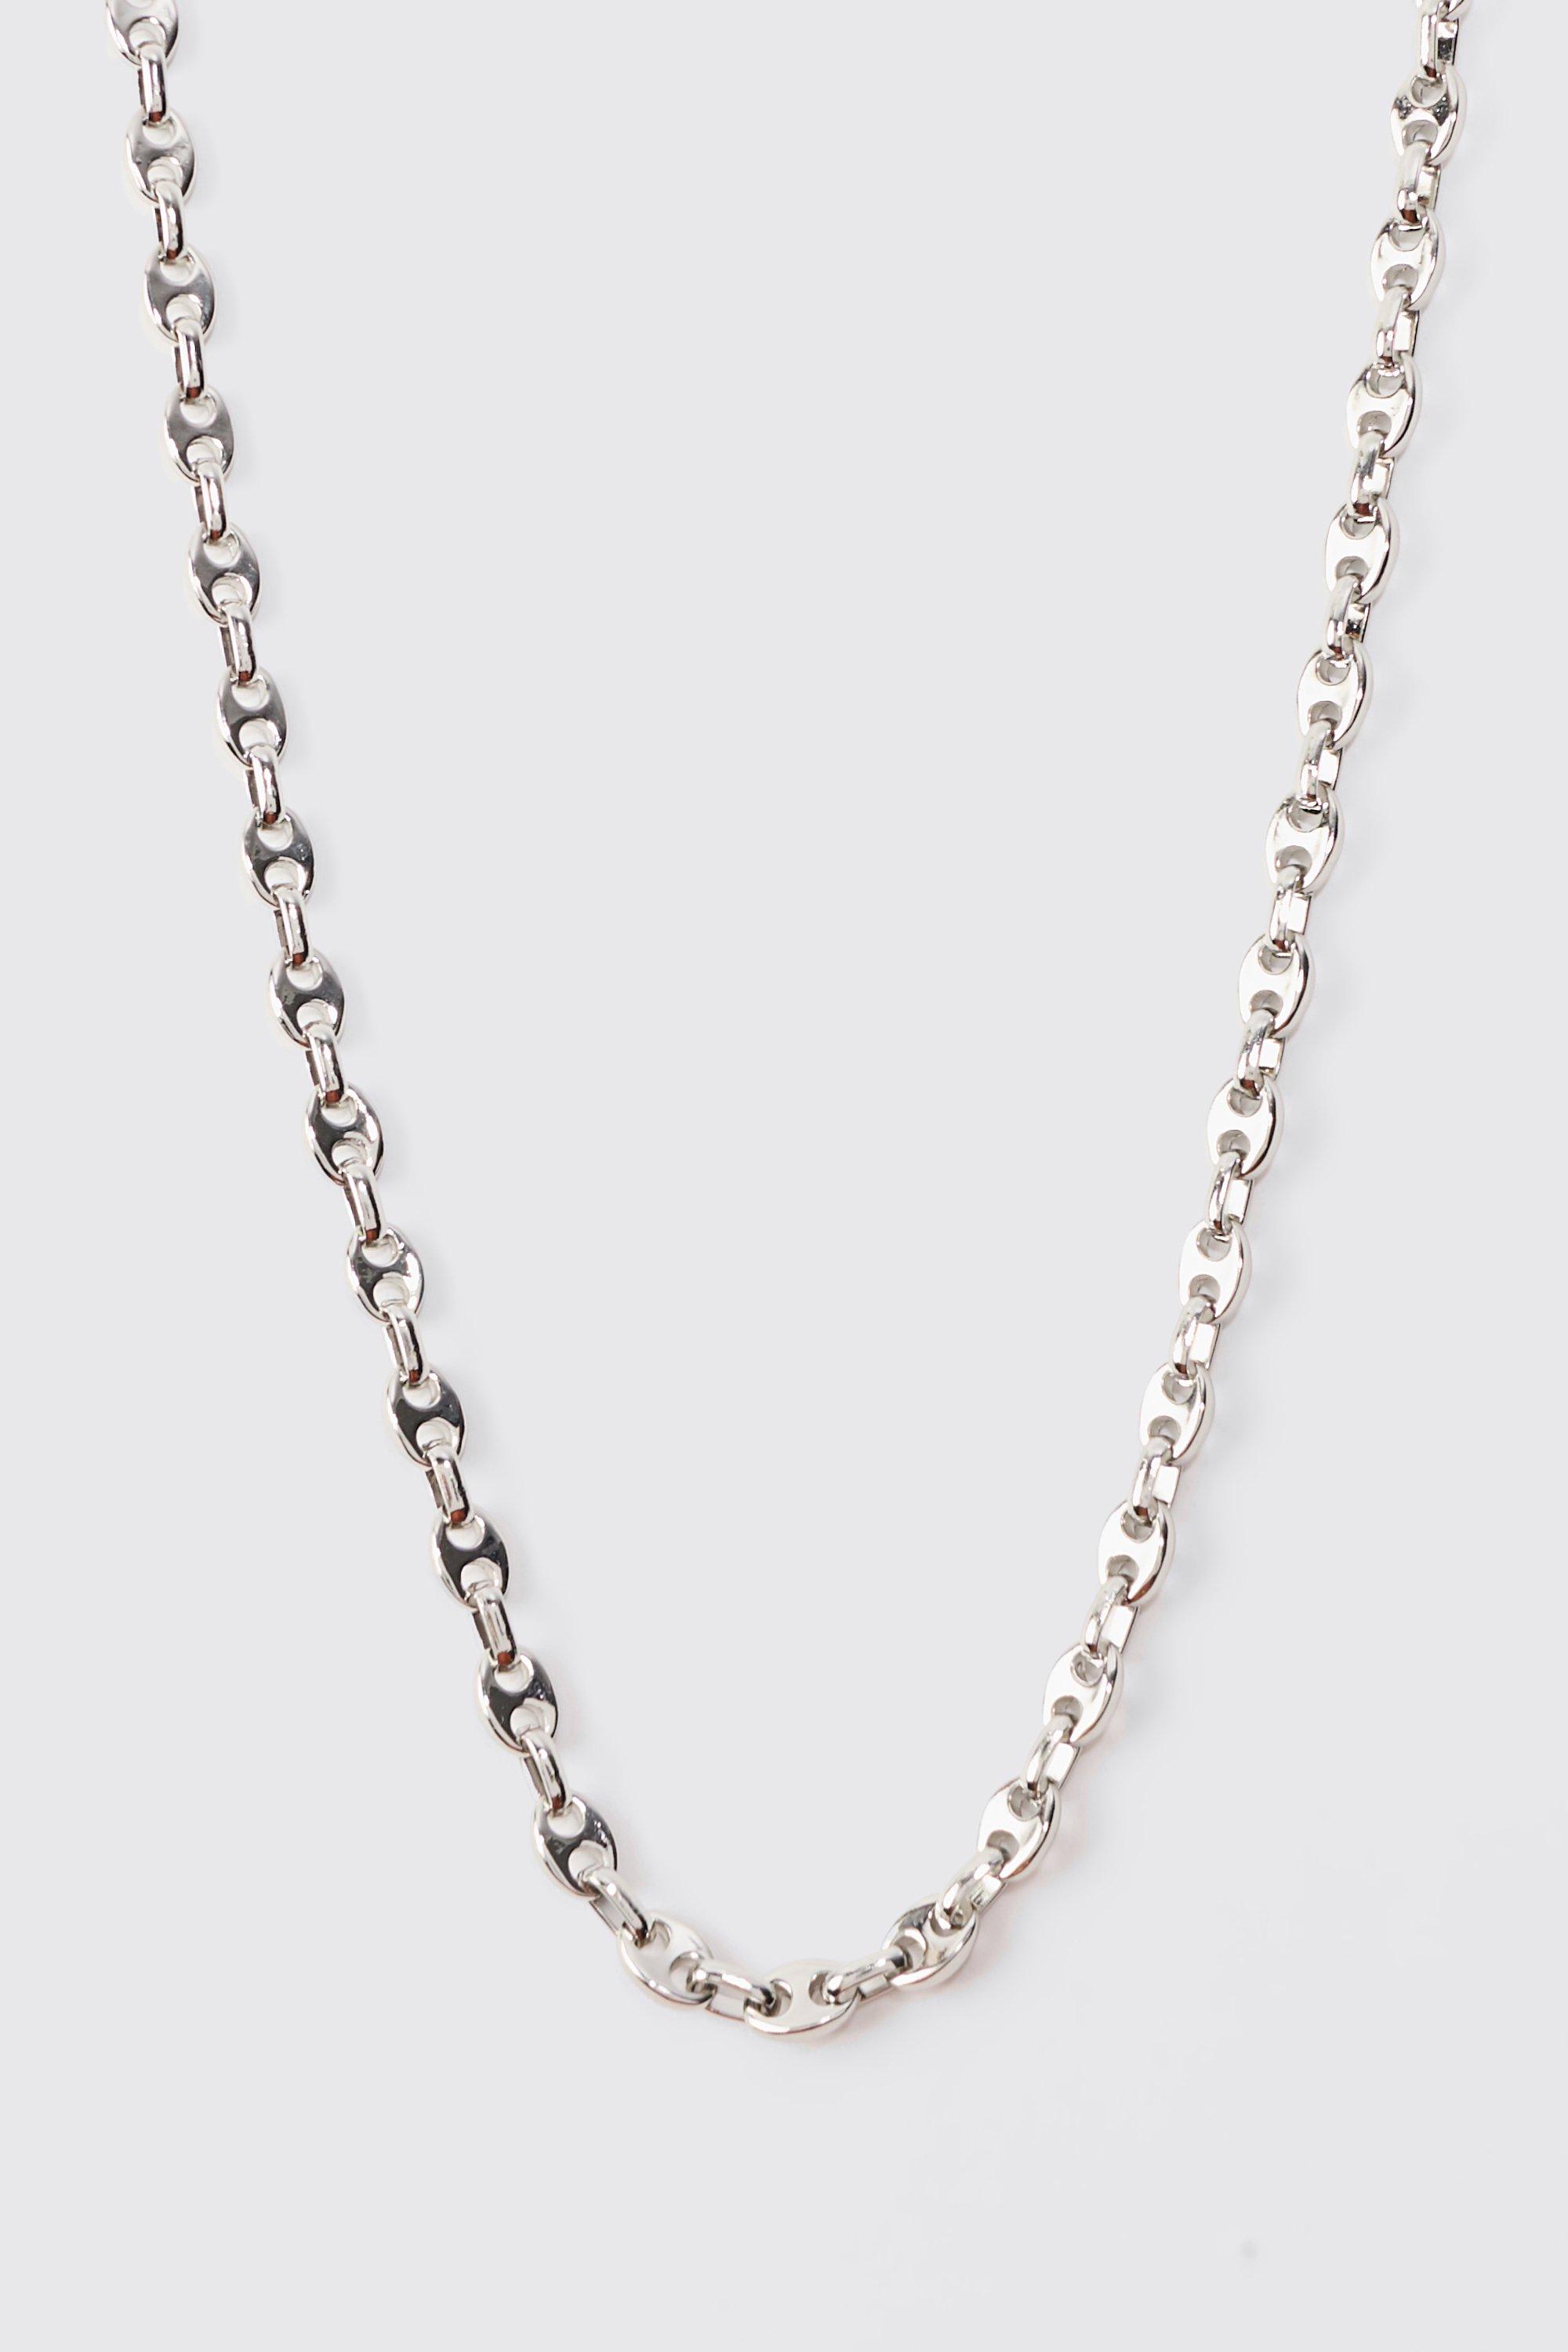 Image of Metal Chain Necklace In Silver, Grigio